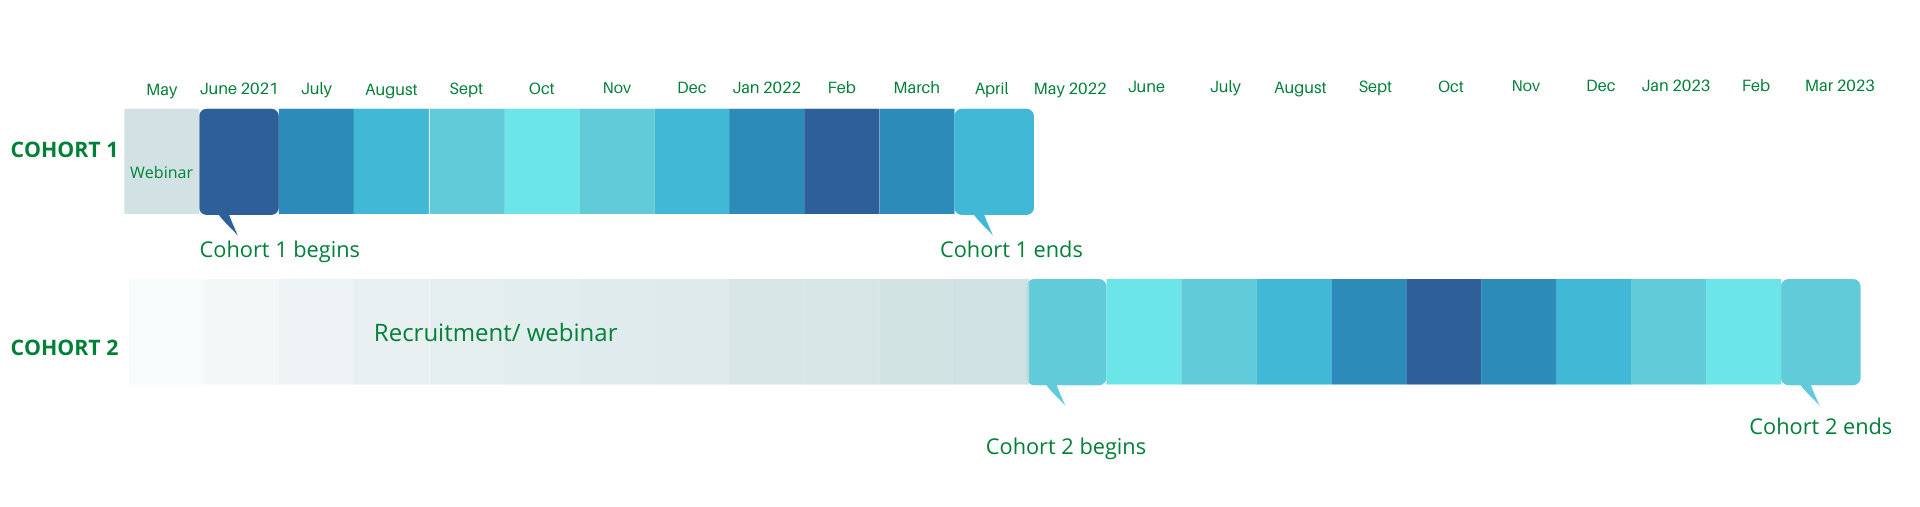 Time line in gradations of blue showing Cohort 1 and Cohort 2